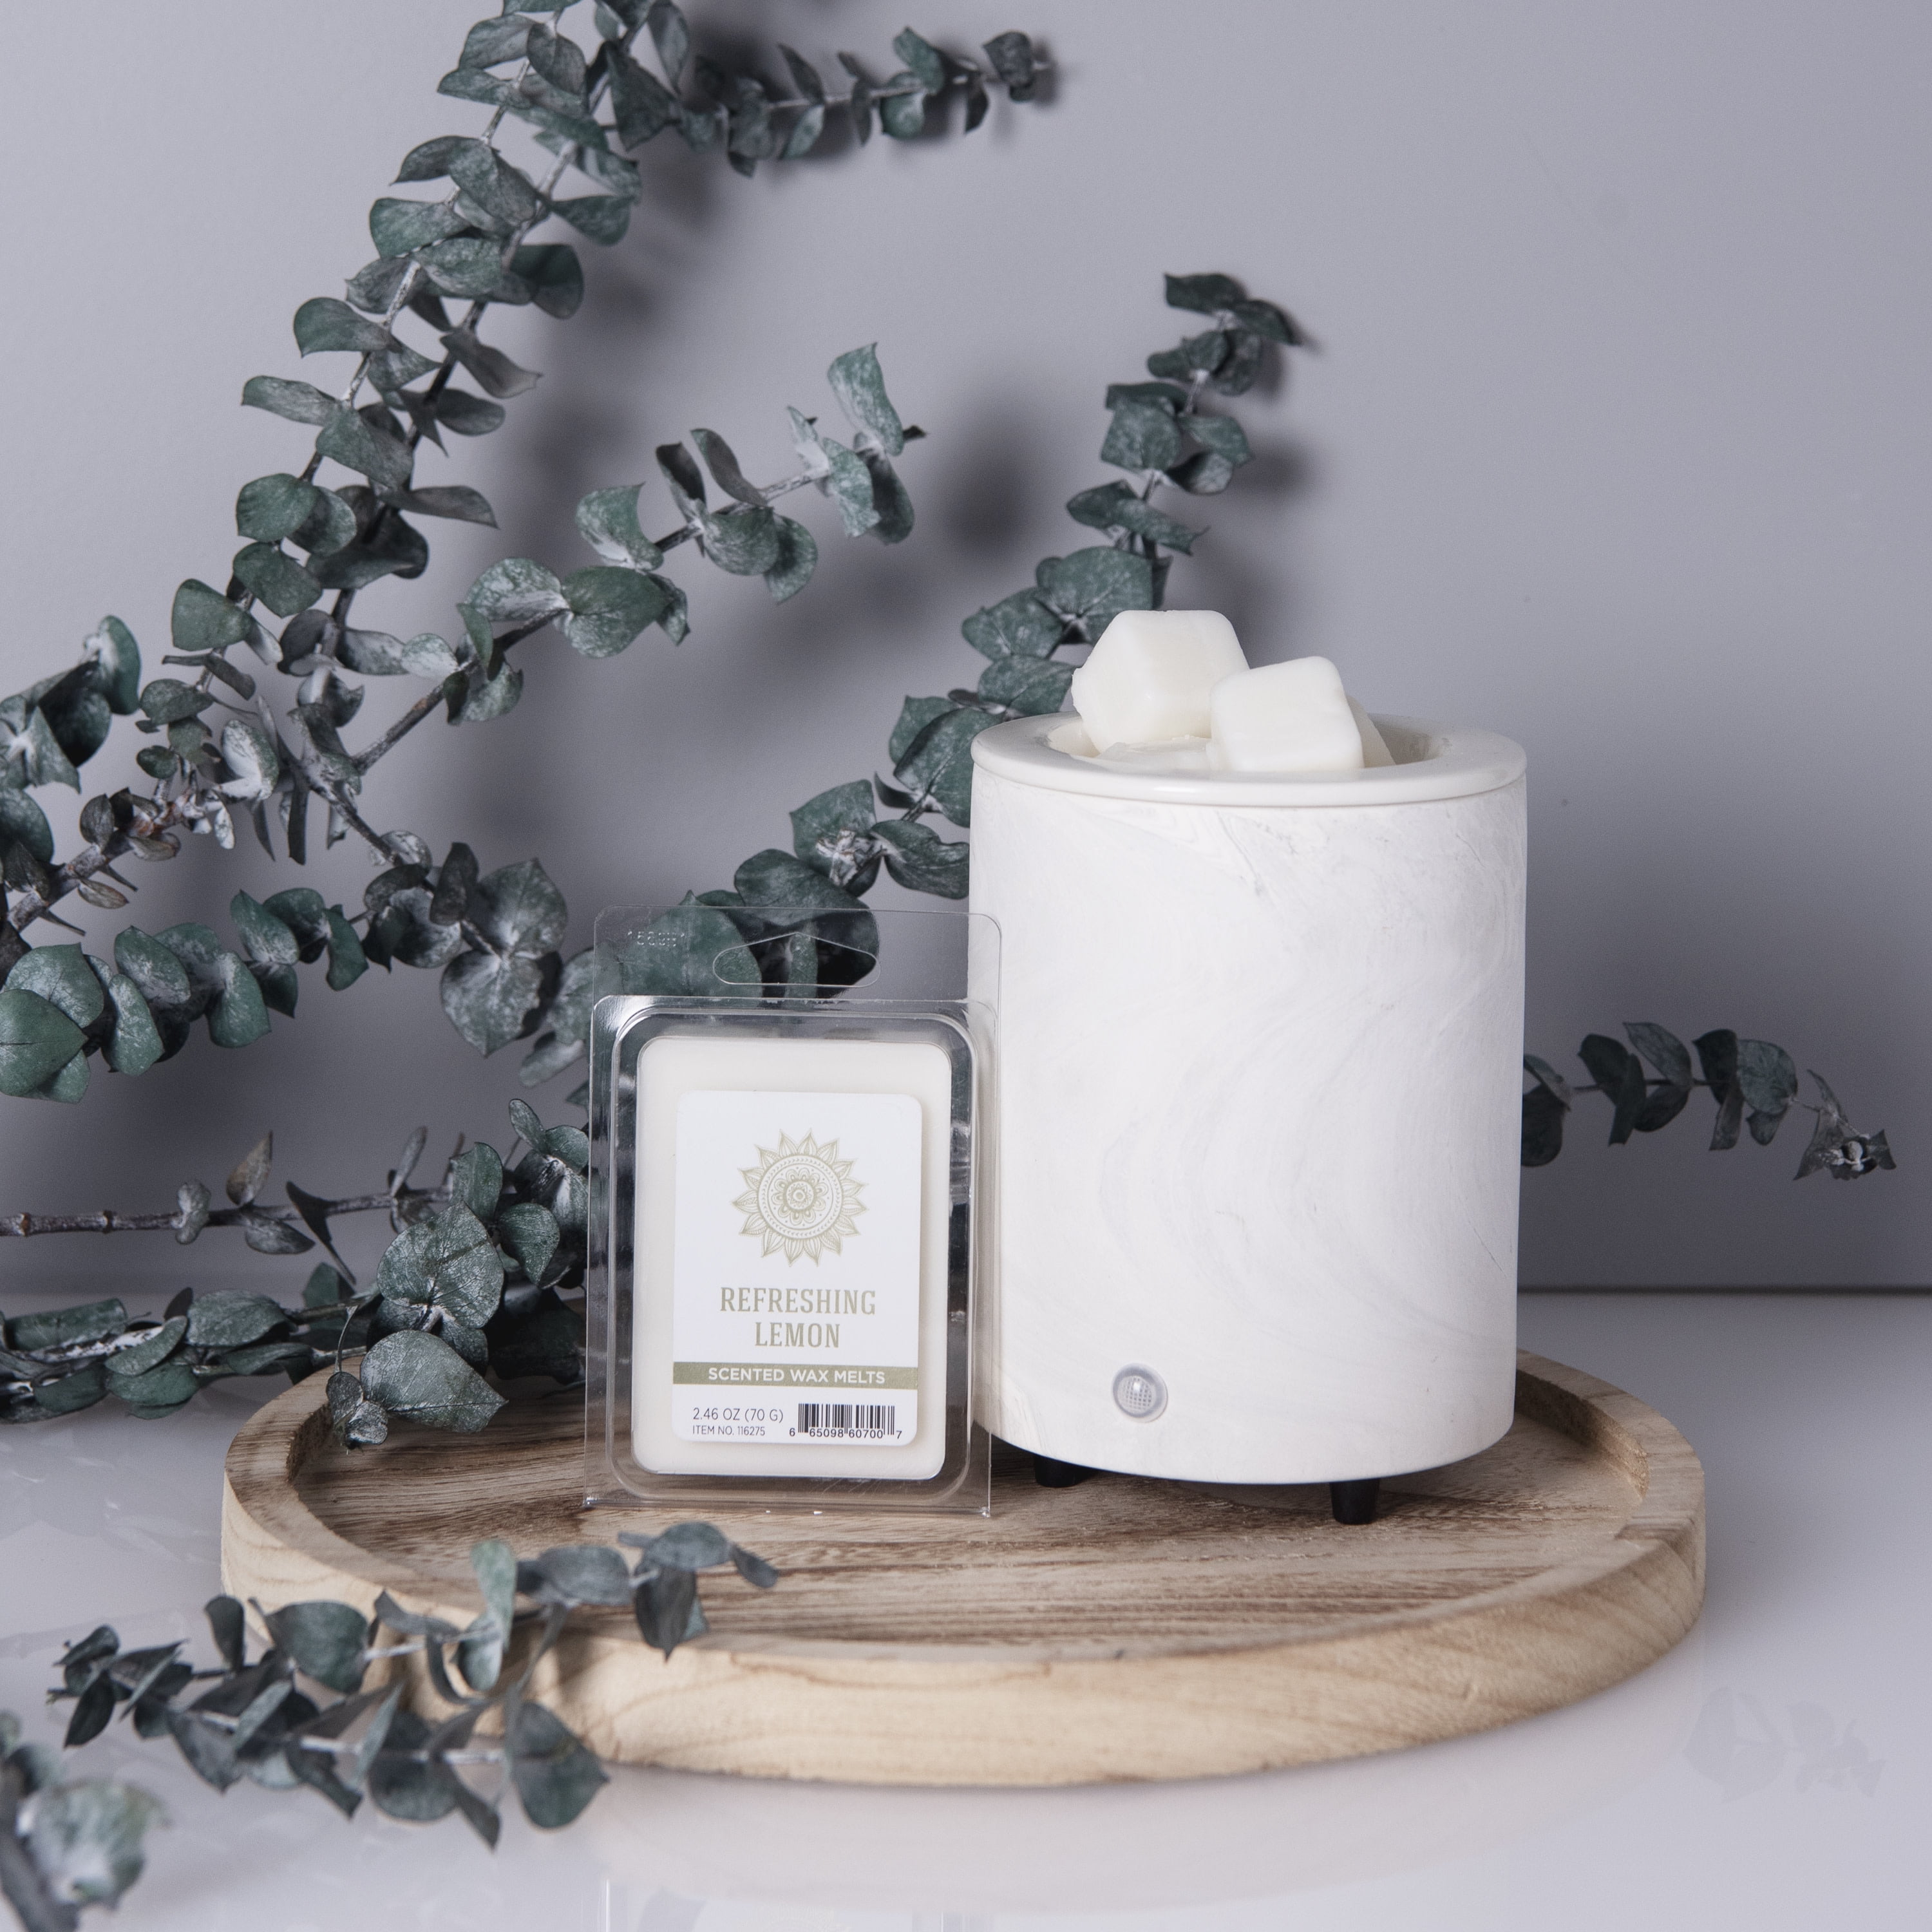 Peppermint Scented Wax Melt – Girlfriends' Candle Co.